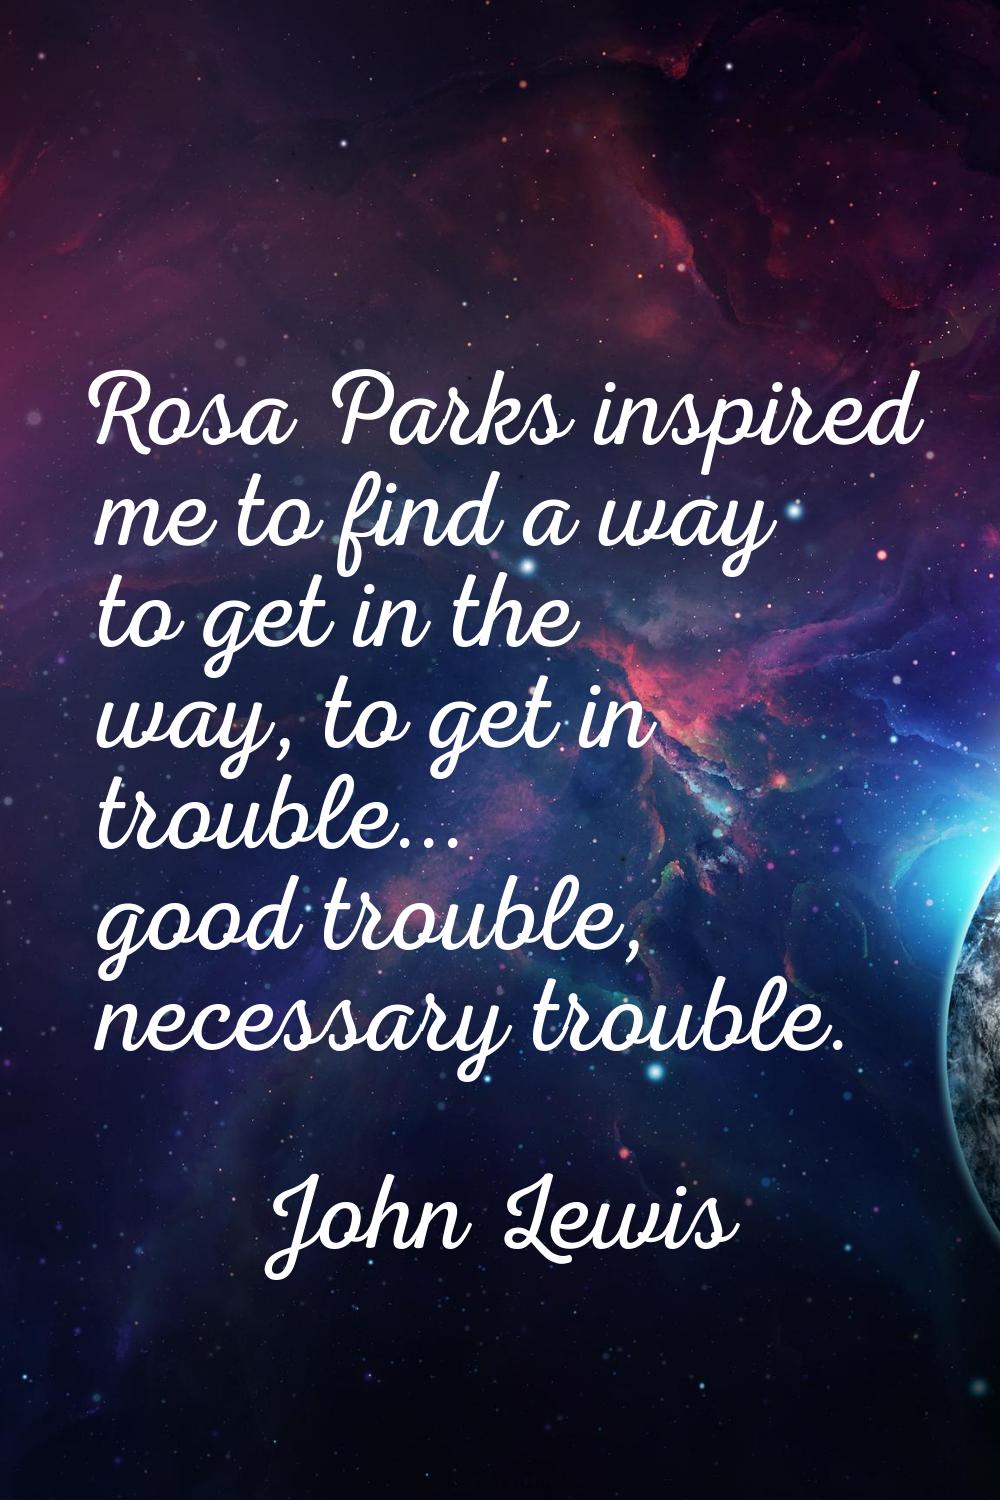 Rosa Parks inspired me to find a way to get in the way, to get in trouble... good trouble, necessar